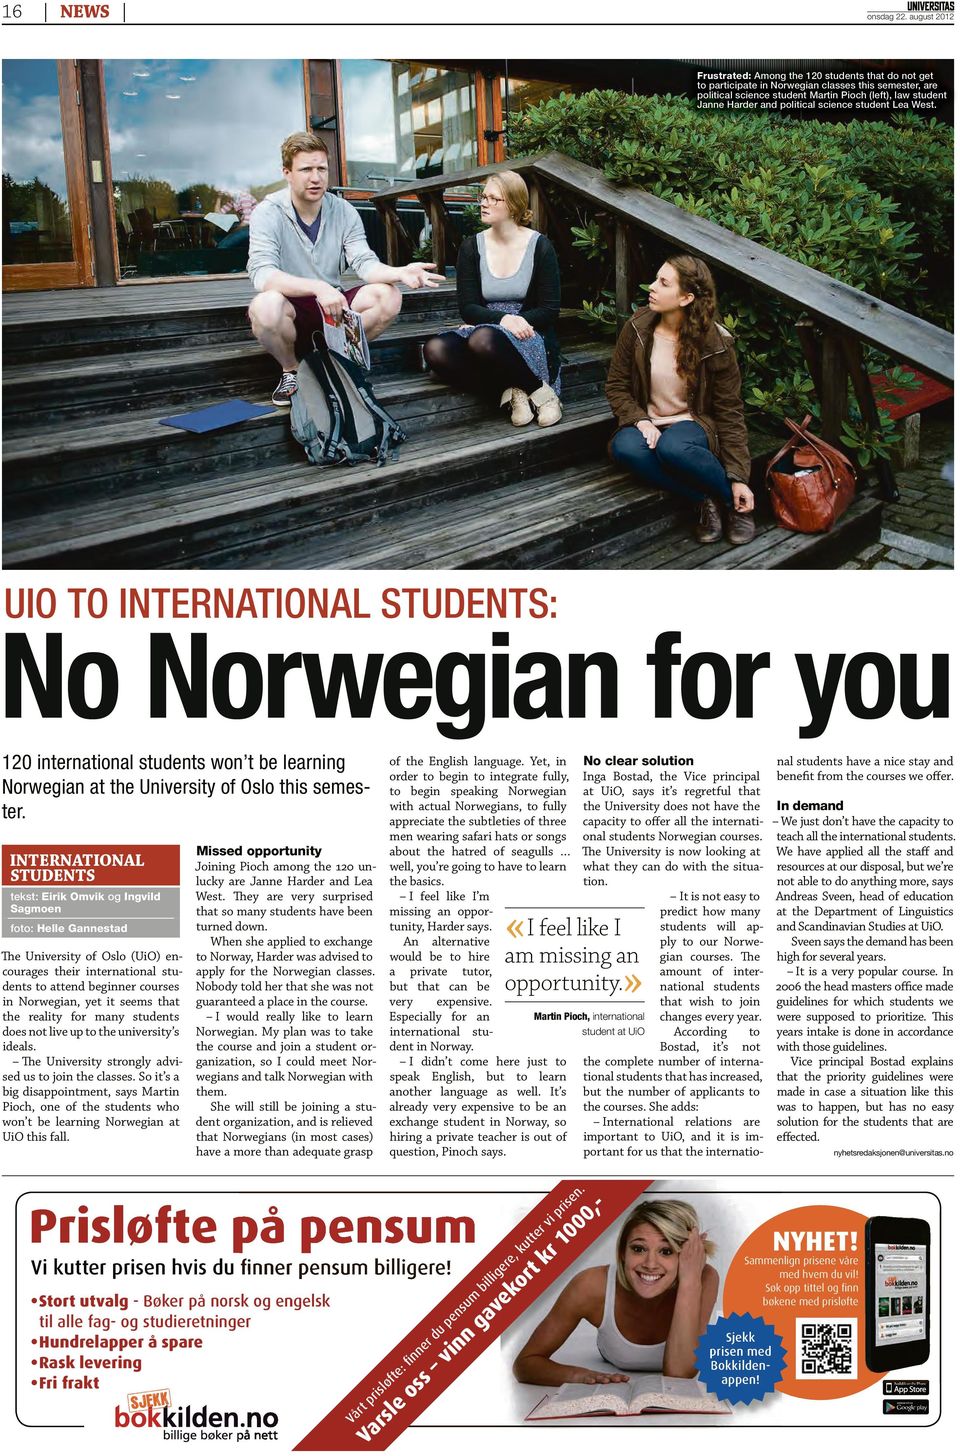 political science student Lea West. UIO TO INTERNATIONAL STUDENTS: No Norwegian for you 120 international students won t be learning Norwegian at the University of Oslo this semester.